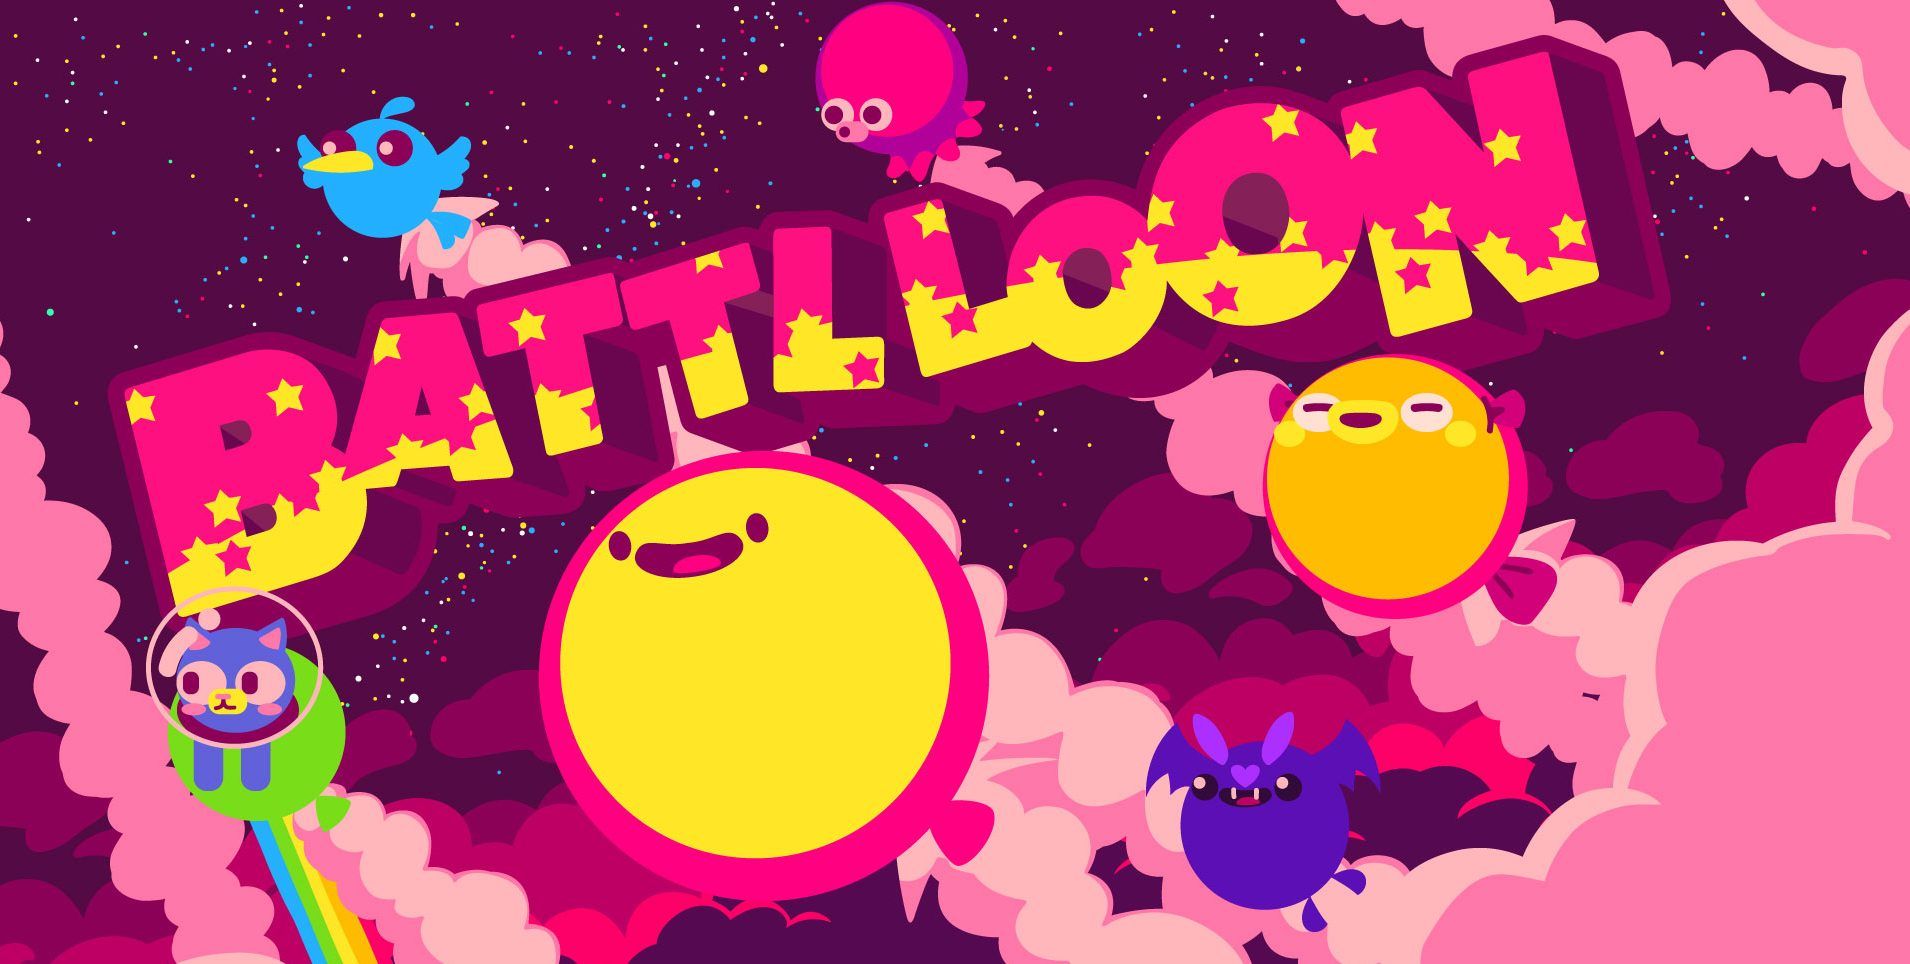 BATTLLOON Review An Adorable Budget Game For Those Rooftop Switch Parties